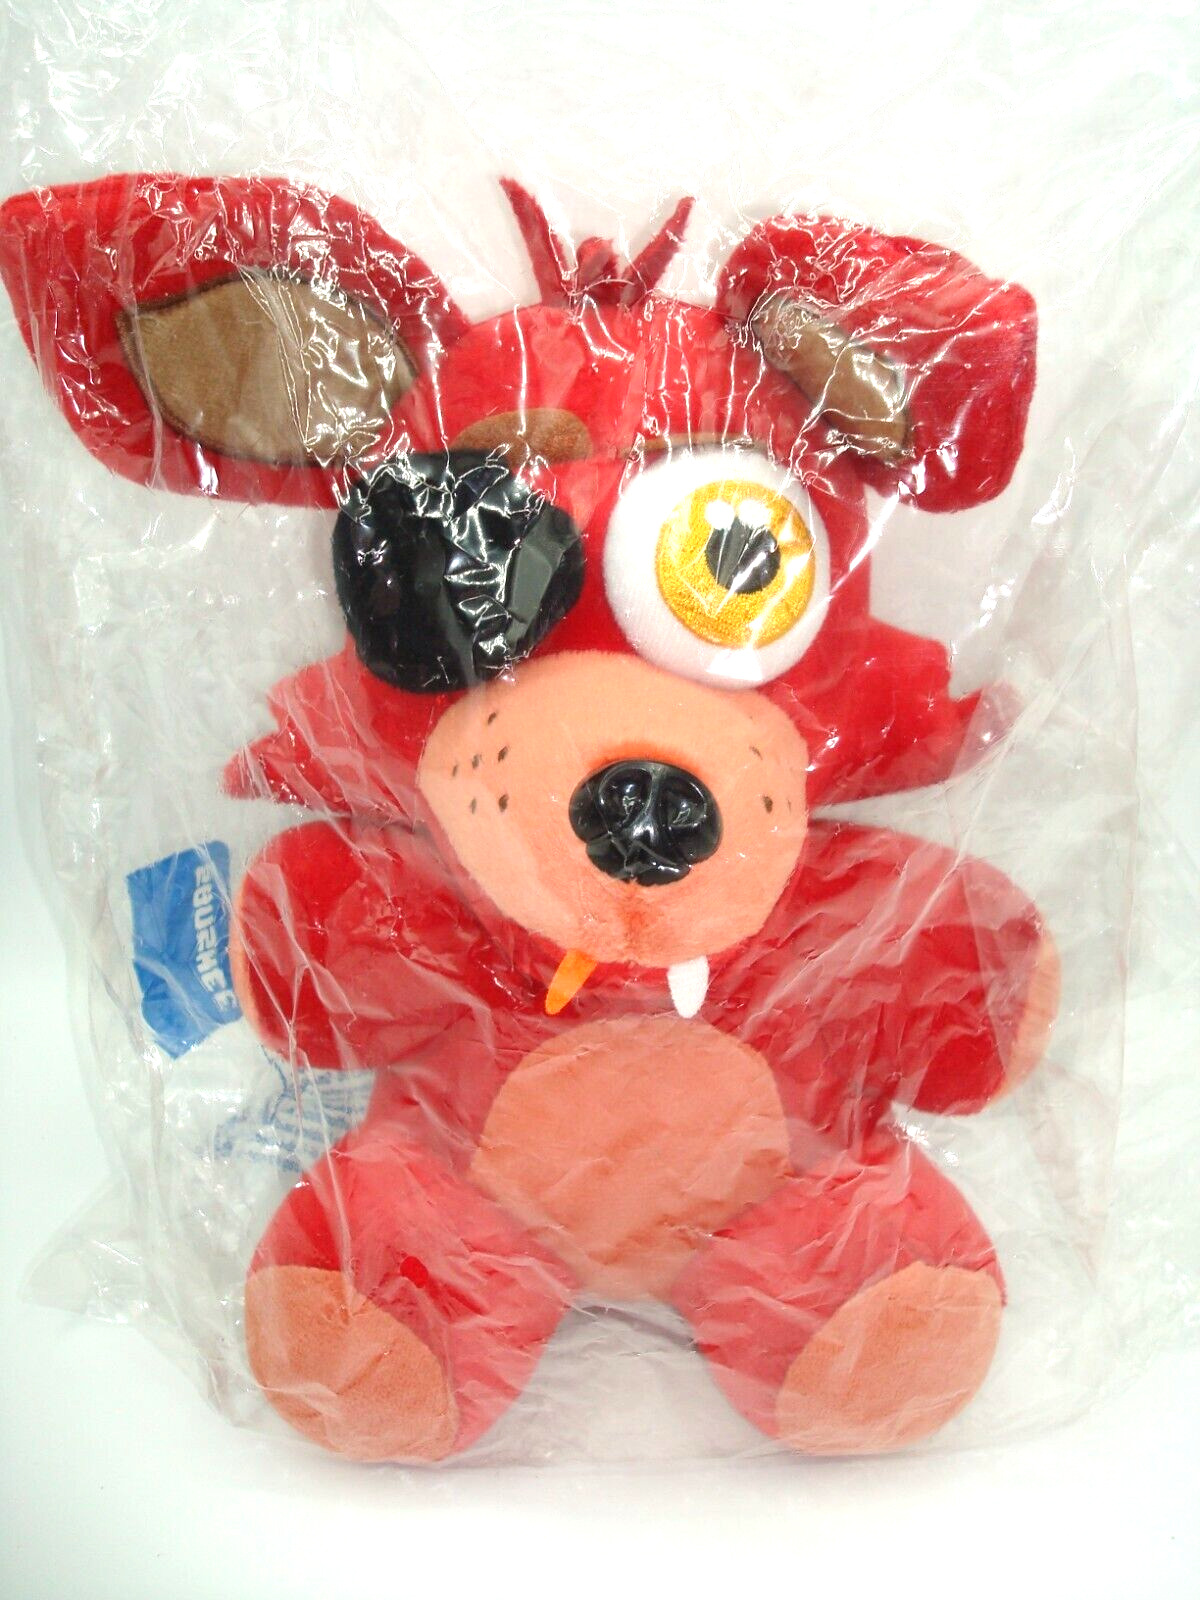 OFFICIAL SANSHEE FNAF FOXY FAN FAVE PLUSH FIVE NIGHTS AT FREDDY'S NEW SEALED